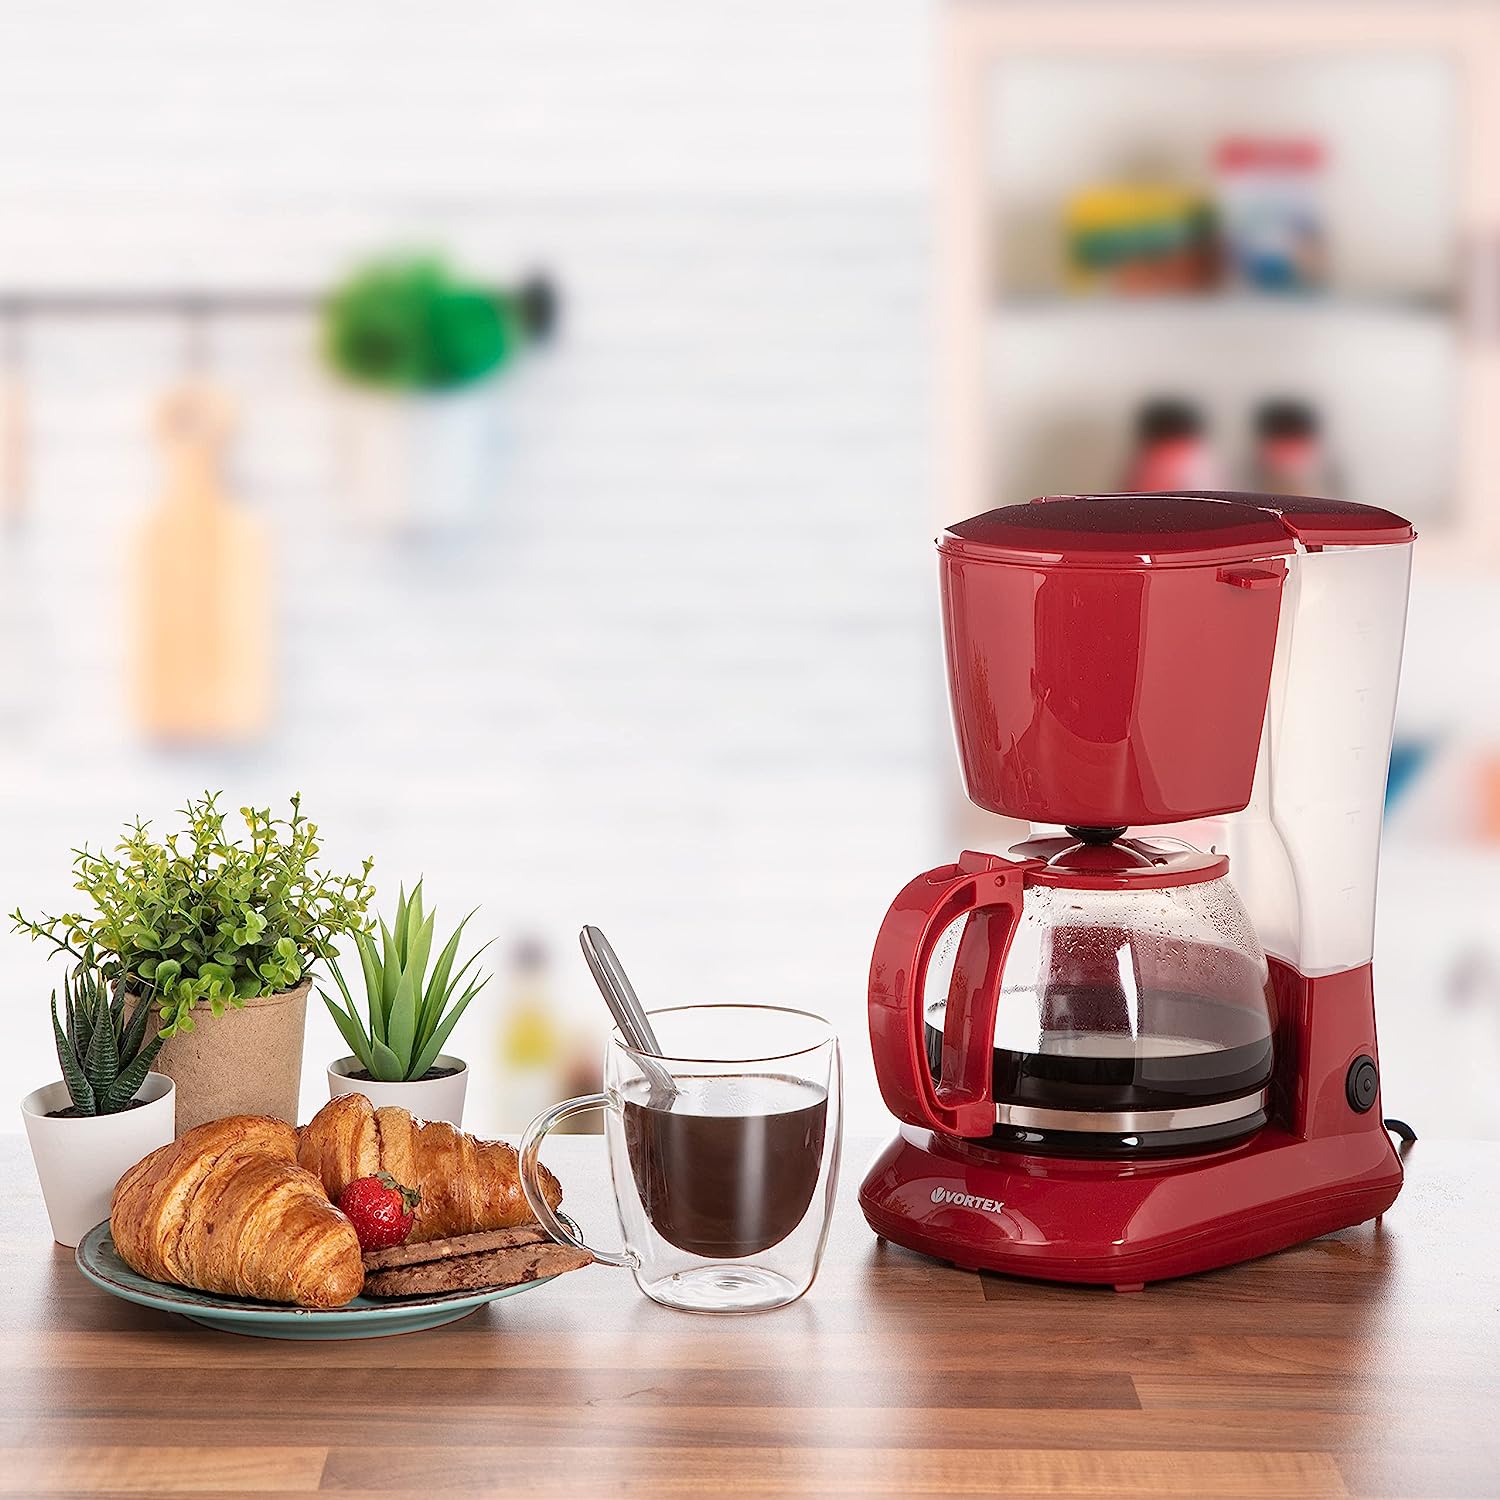 VORTEX Filter Coffee Machine with 1.25 L Glass Jug VO4012RD - Coffee Machine Red for up to 12 Cups - Coffee Filter Machine with Warming Plate - Drip Stop Filter Coffee Machine - 750 Watt, Red